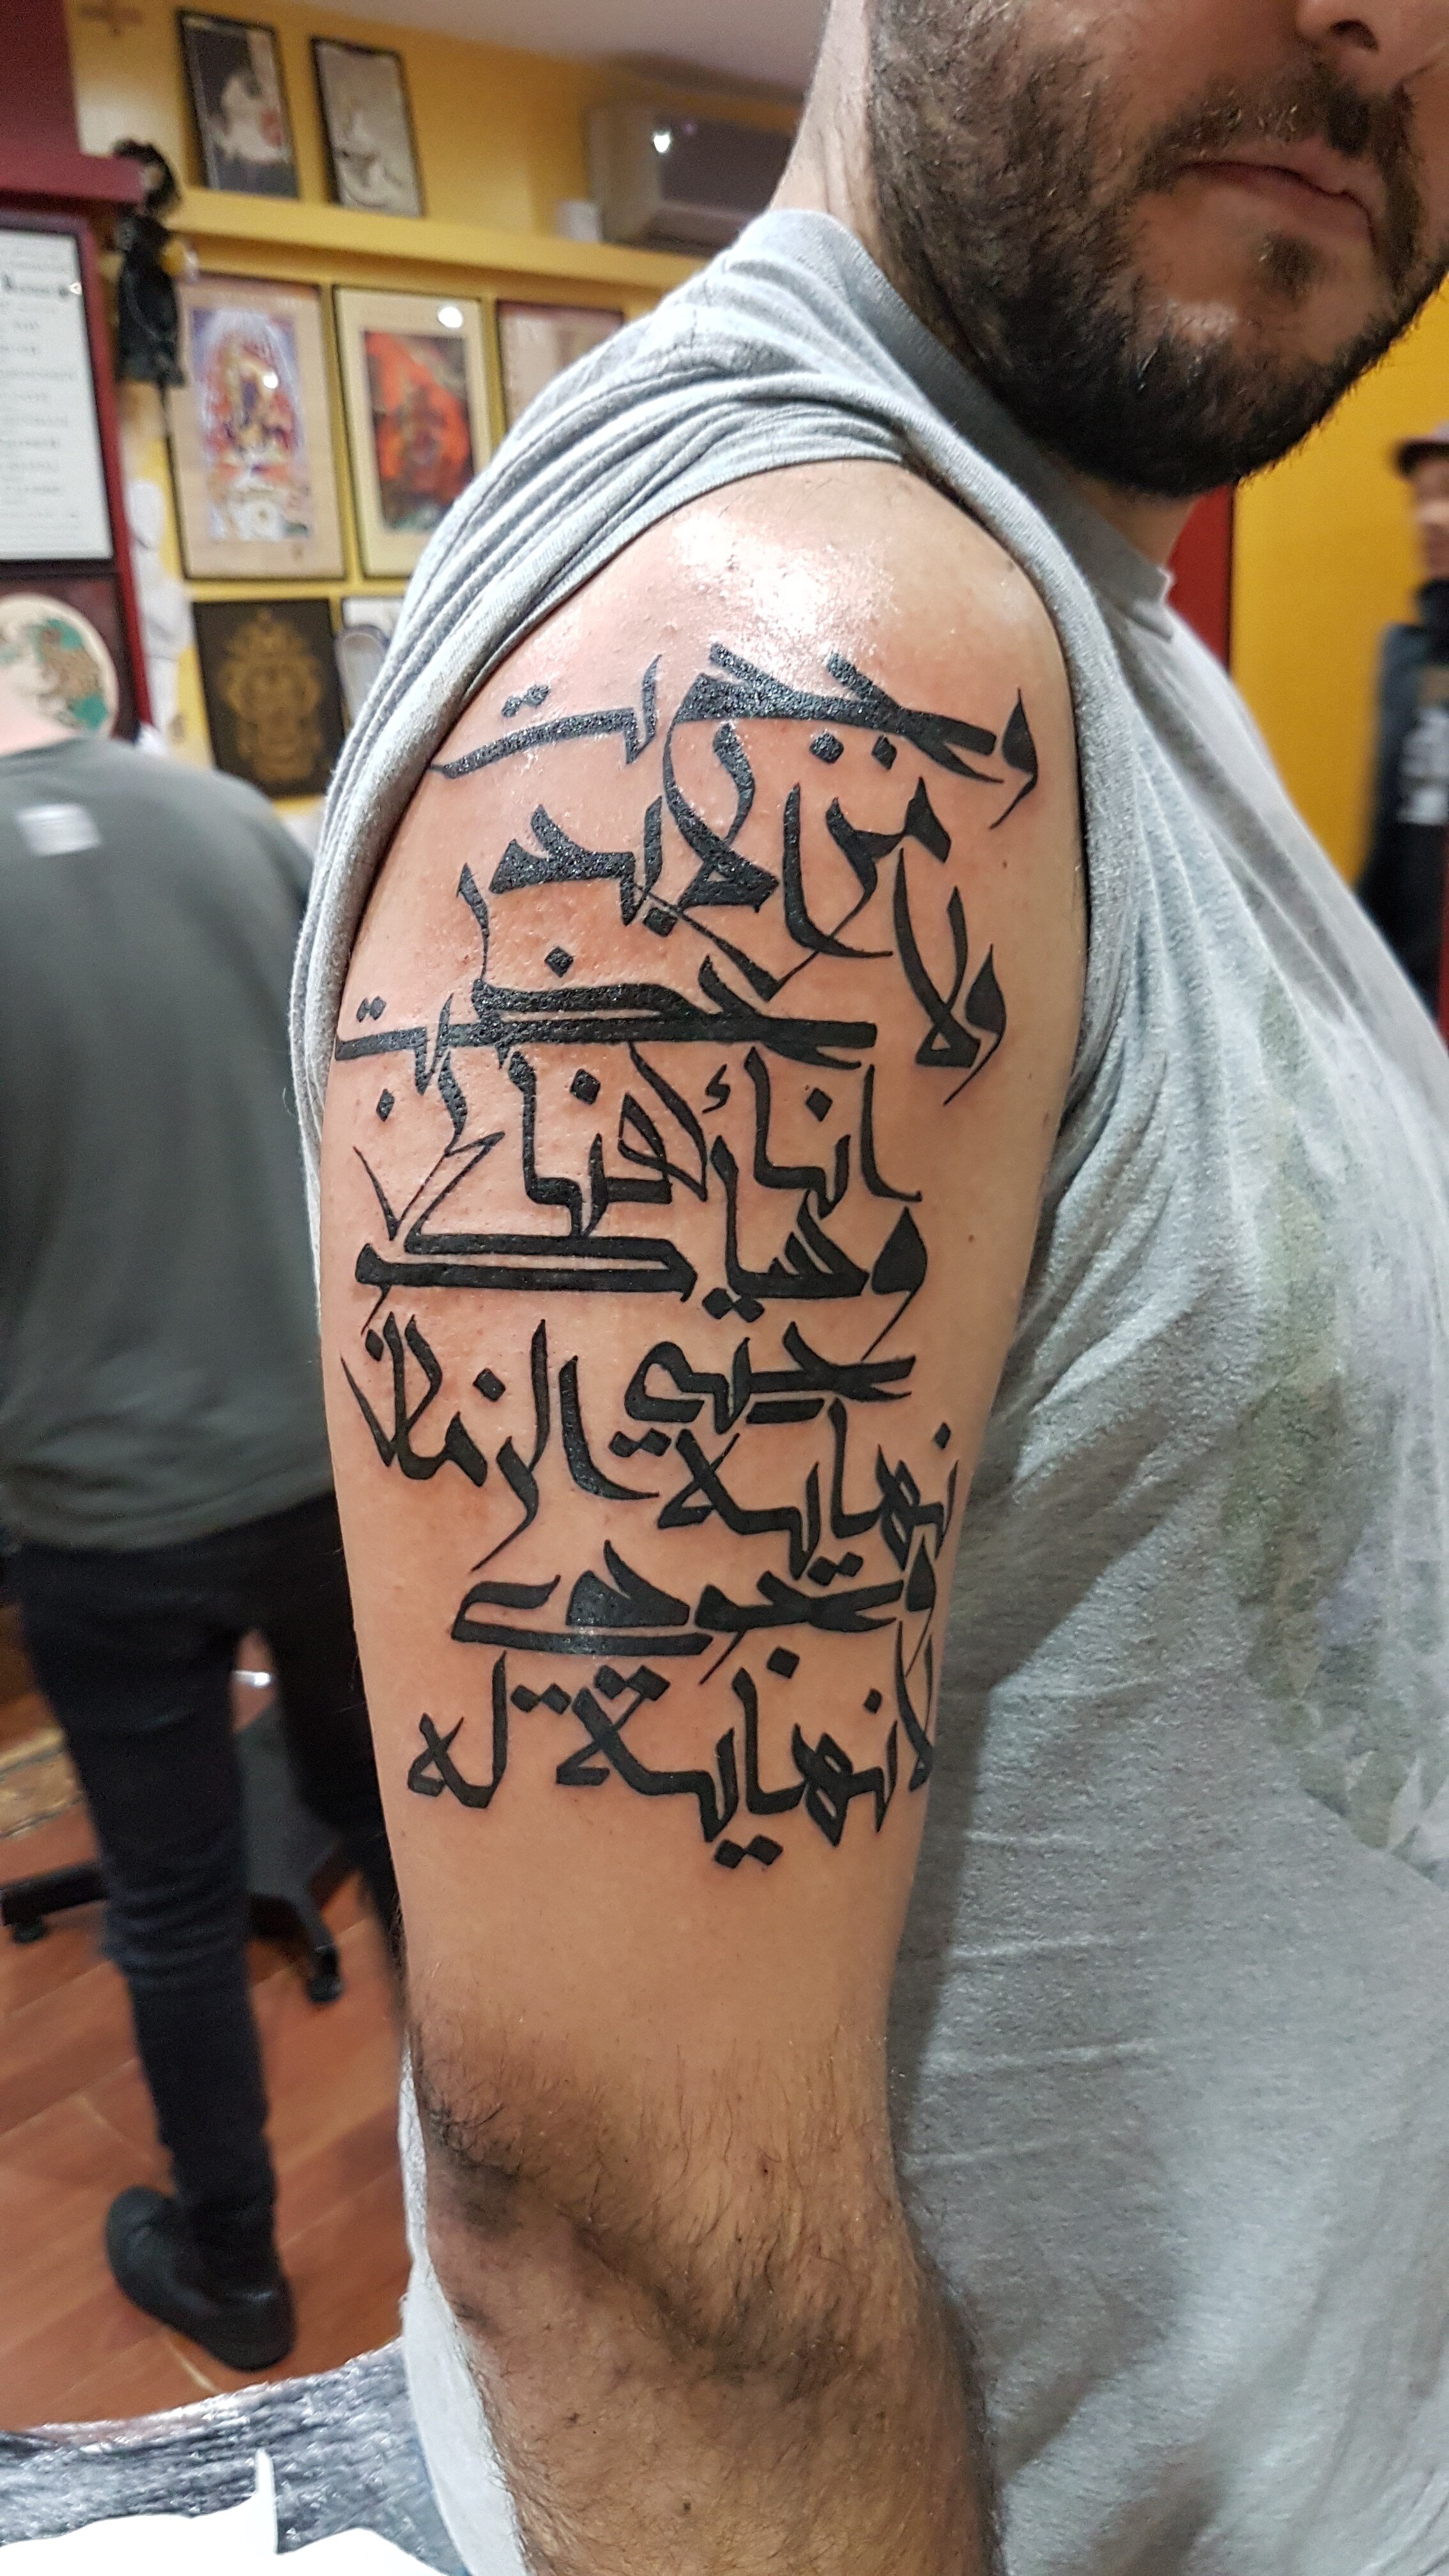 Think before you ink 13 of the worst Arabic tattoos found on the Internet   Al Bawaba